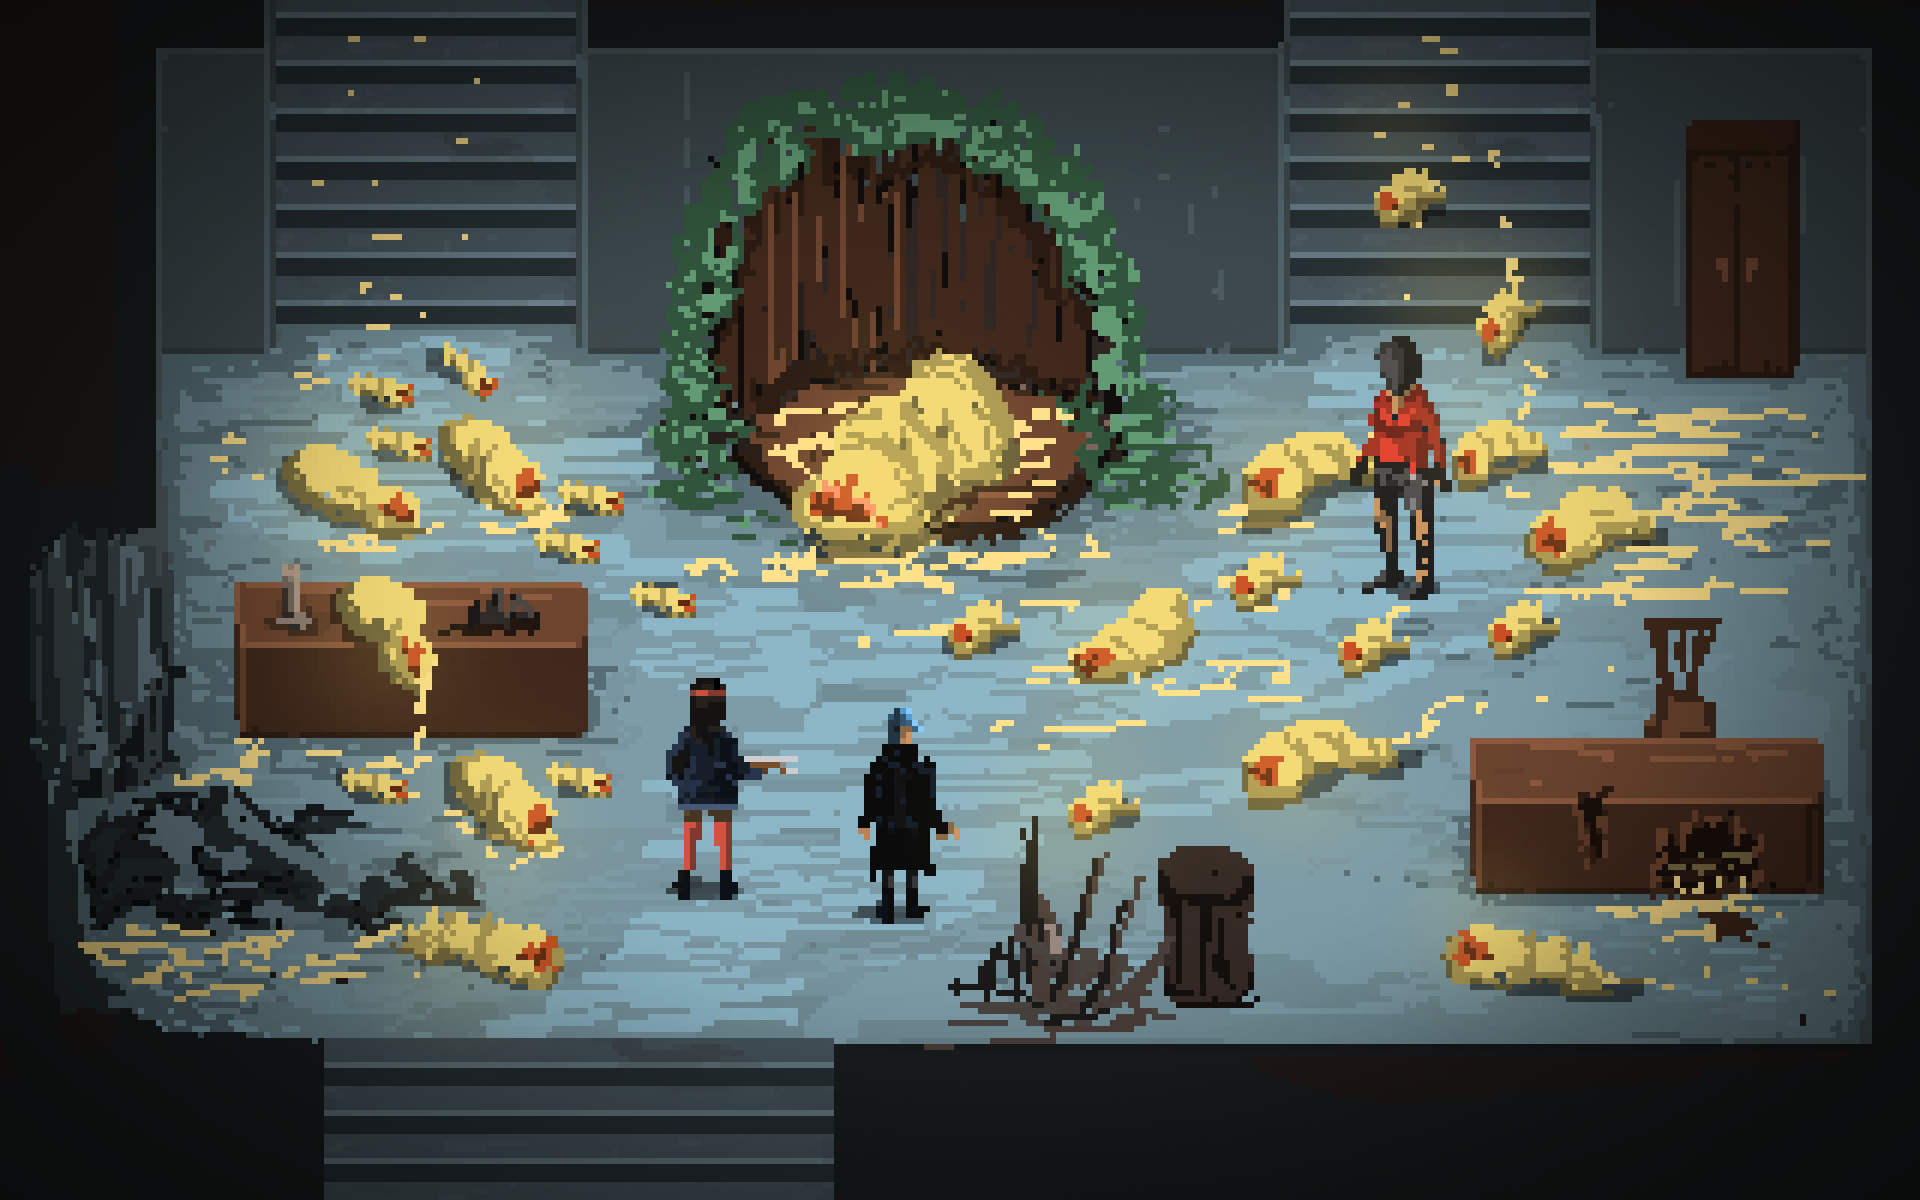 Death Trash: A Gritty Post Apocalyptic Pixel Art RPG